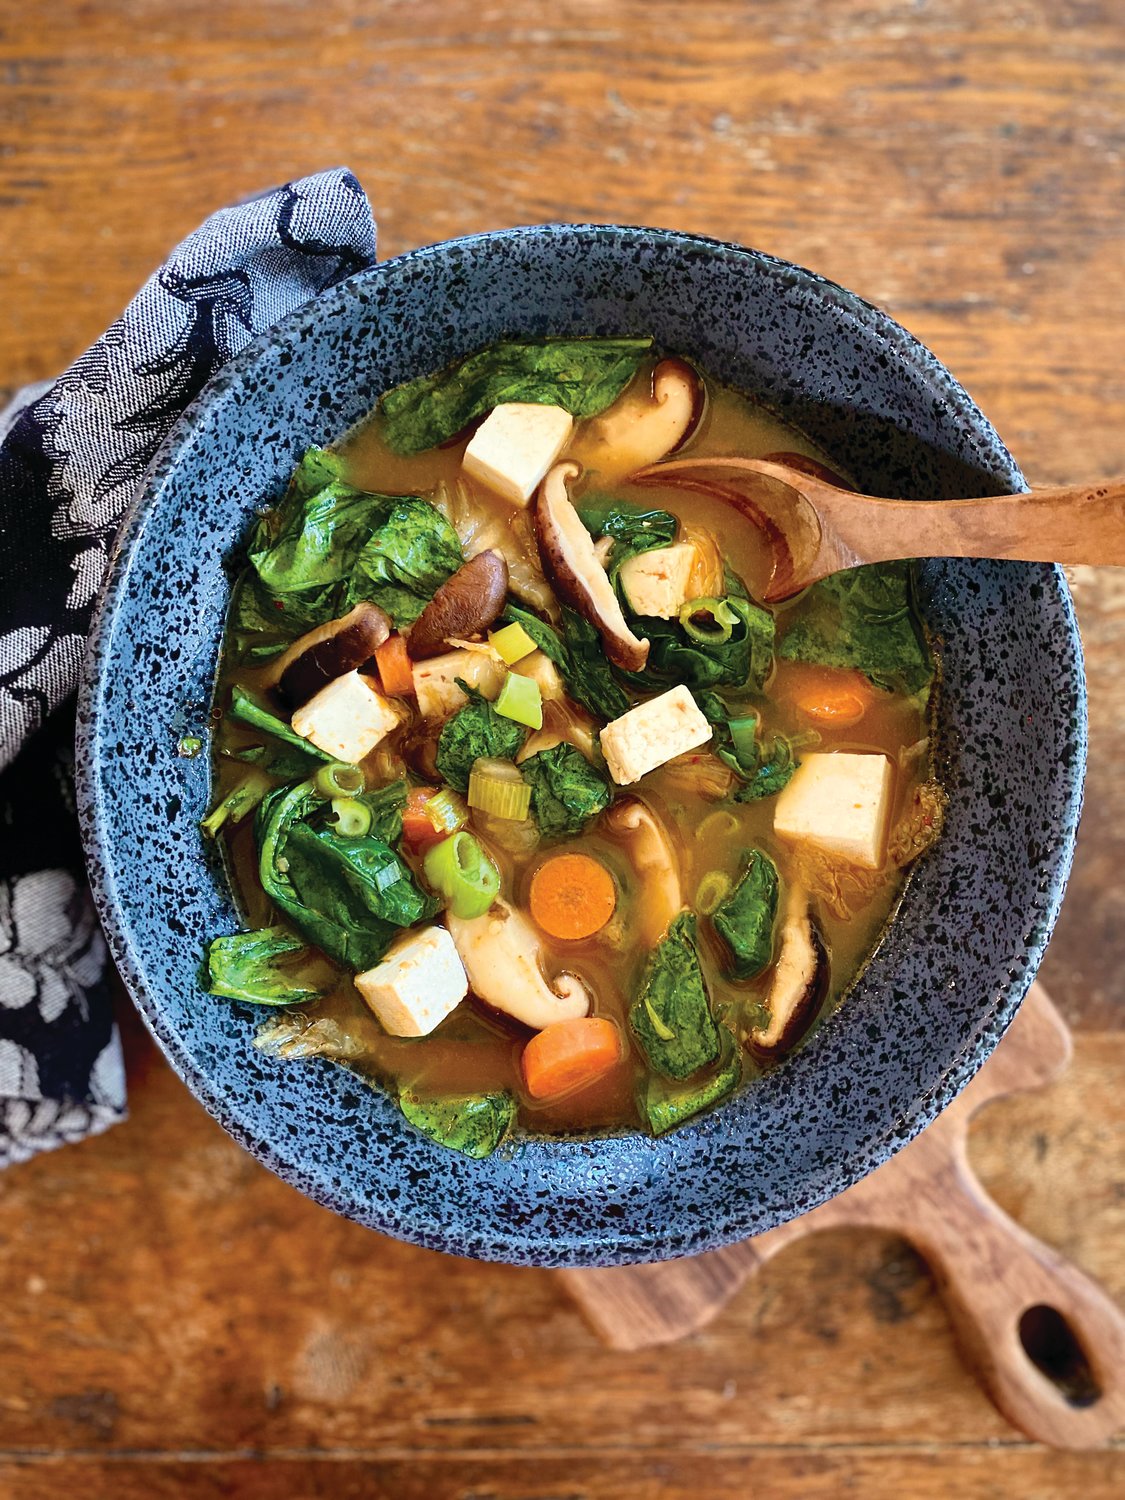 If you seek a wallop of flavor and a jolt of heat to propel you over winter’s finish line, make a steaming pot of umami-rich soup.